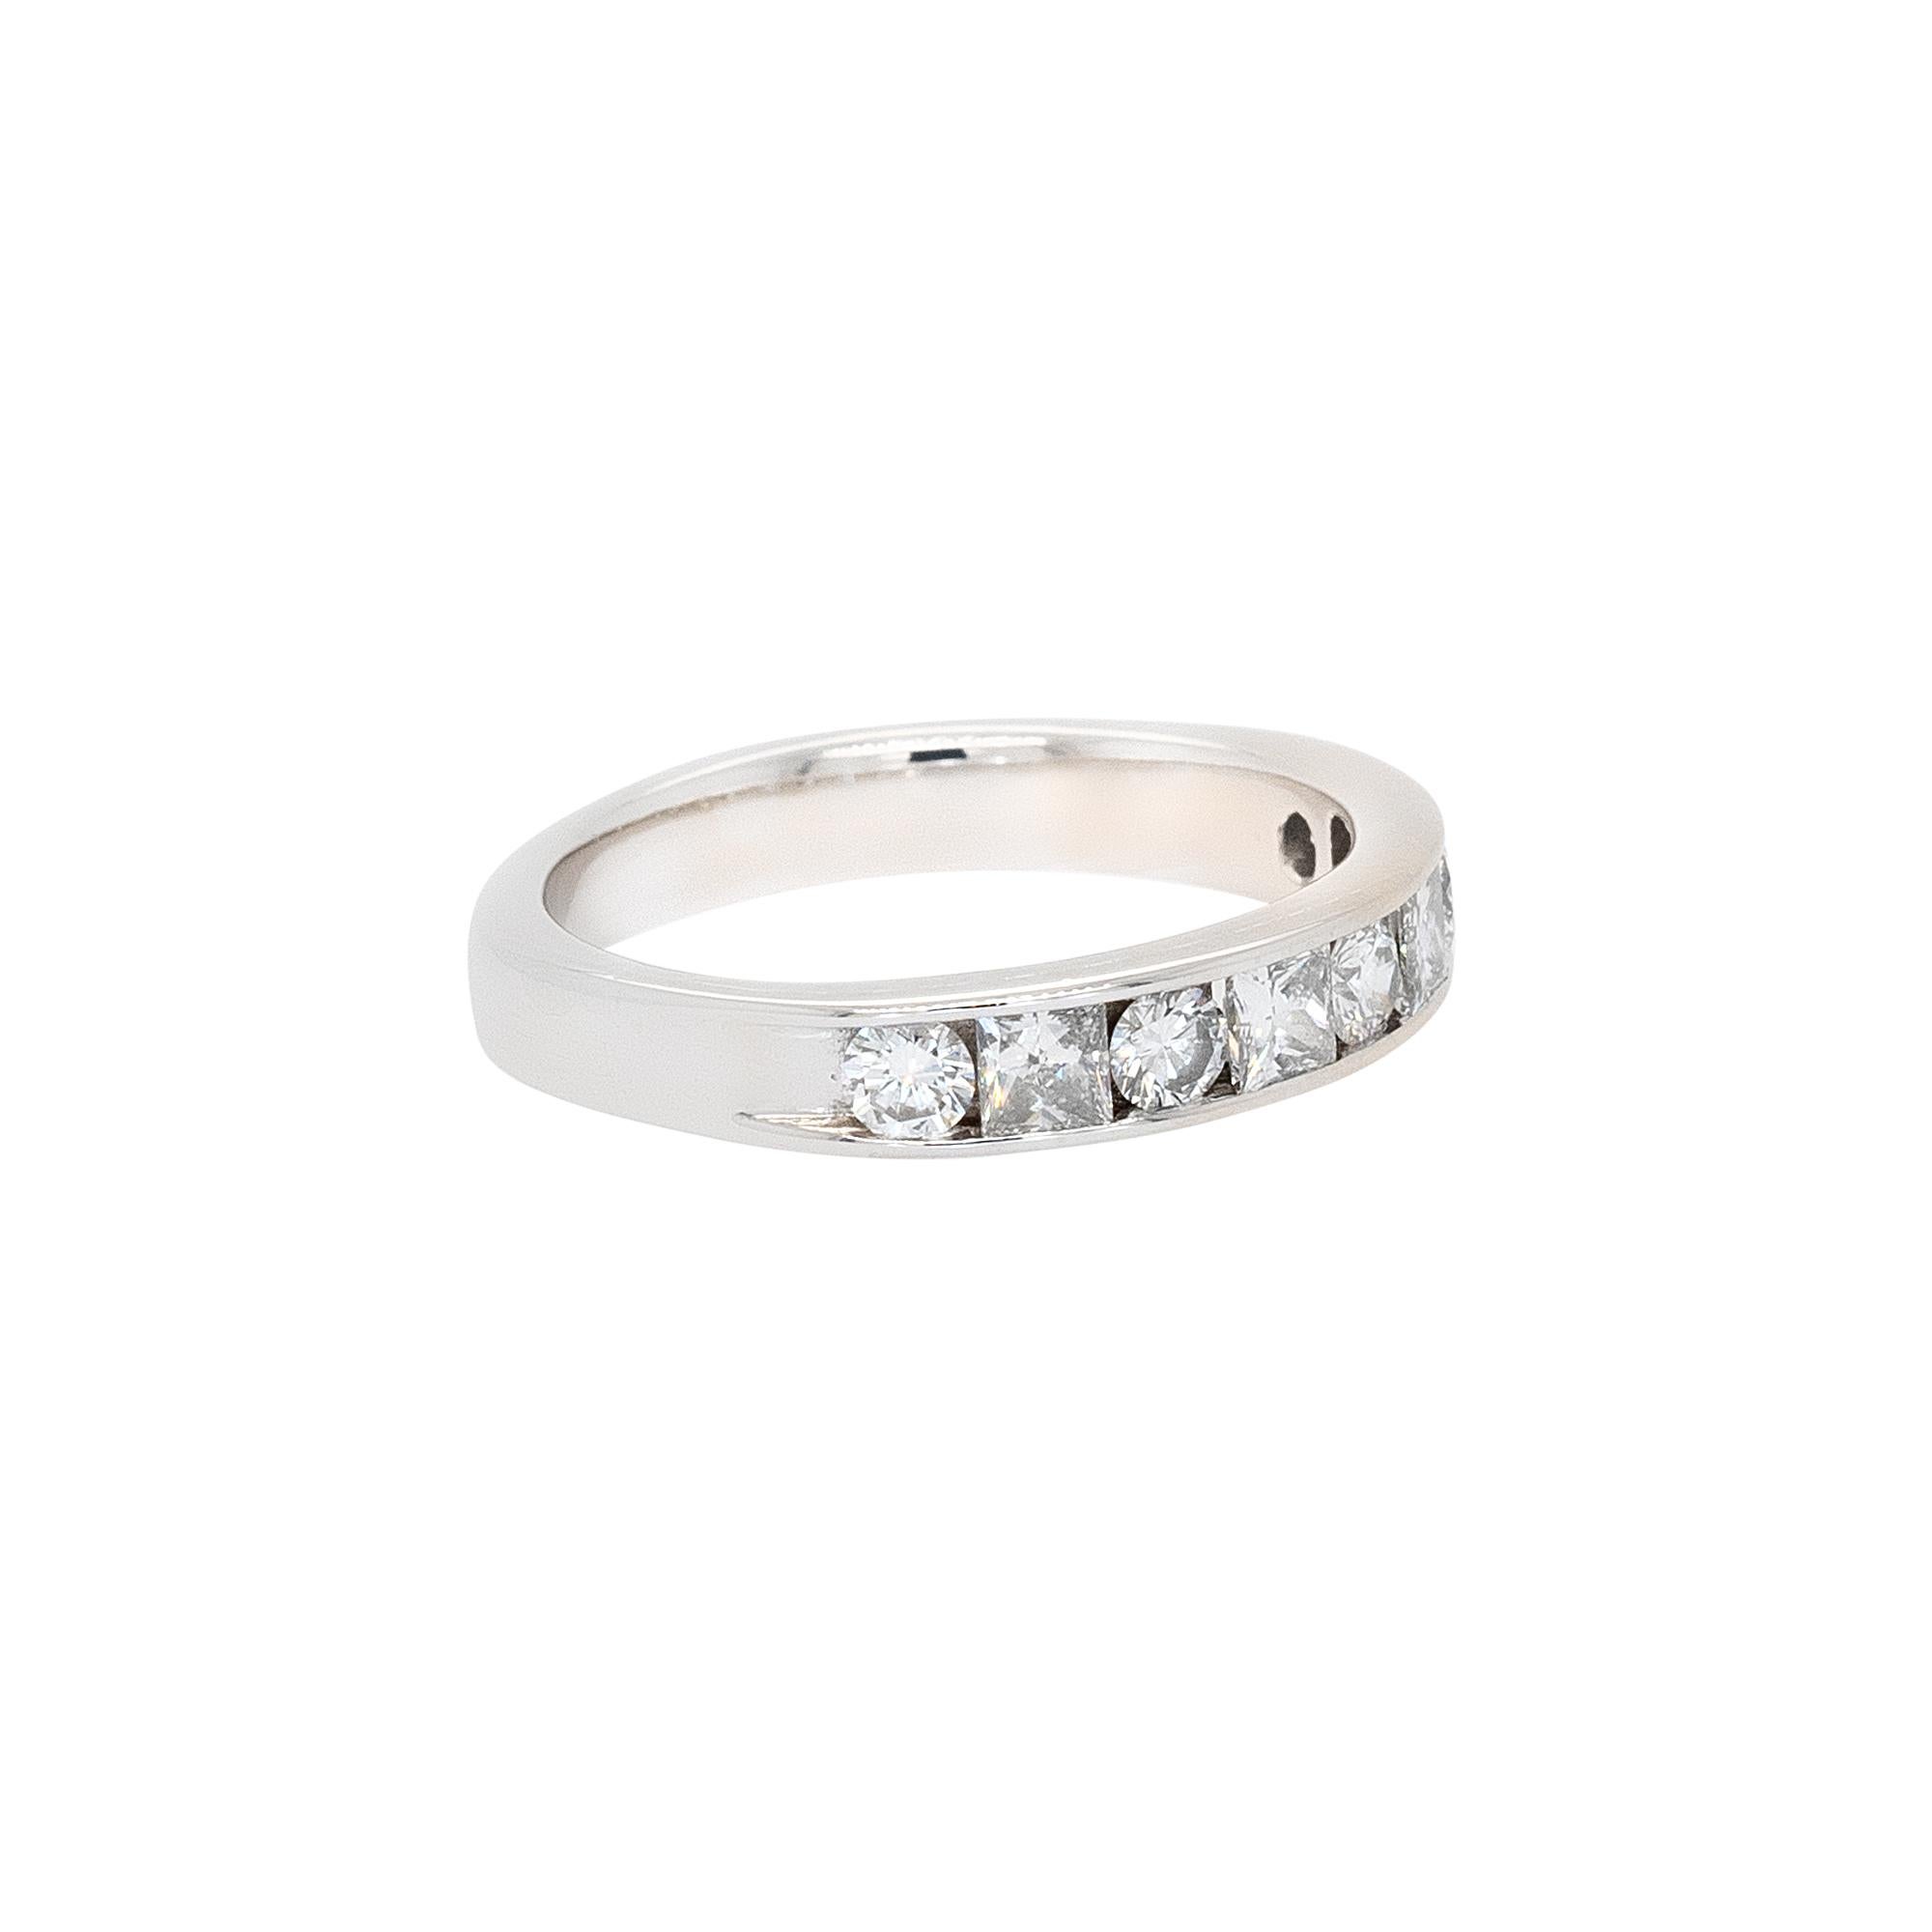 Diamond Details:
Round Brilliant: 0.32ct
Princess Cut: 0.52ct
G/H Color VS Clarity
Ring Material: 14k White Gold
Ring Size: 5.5 (can be sized)
Total Weight: 3.6g (2.3dwt)
Additional Details: This item comes with a presentation box!
SKU: